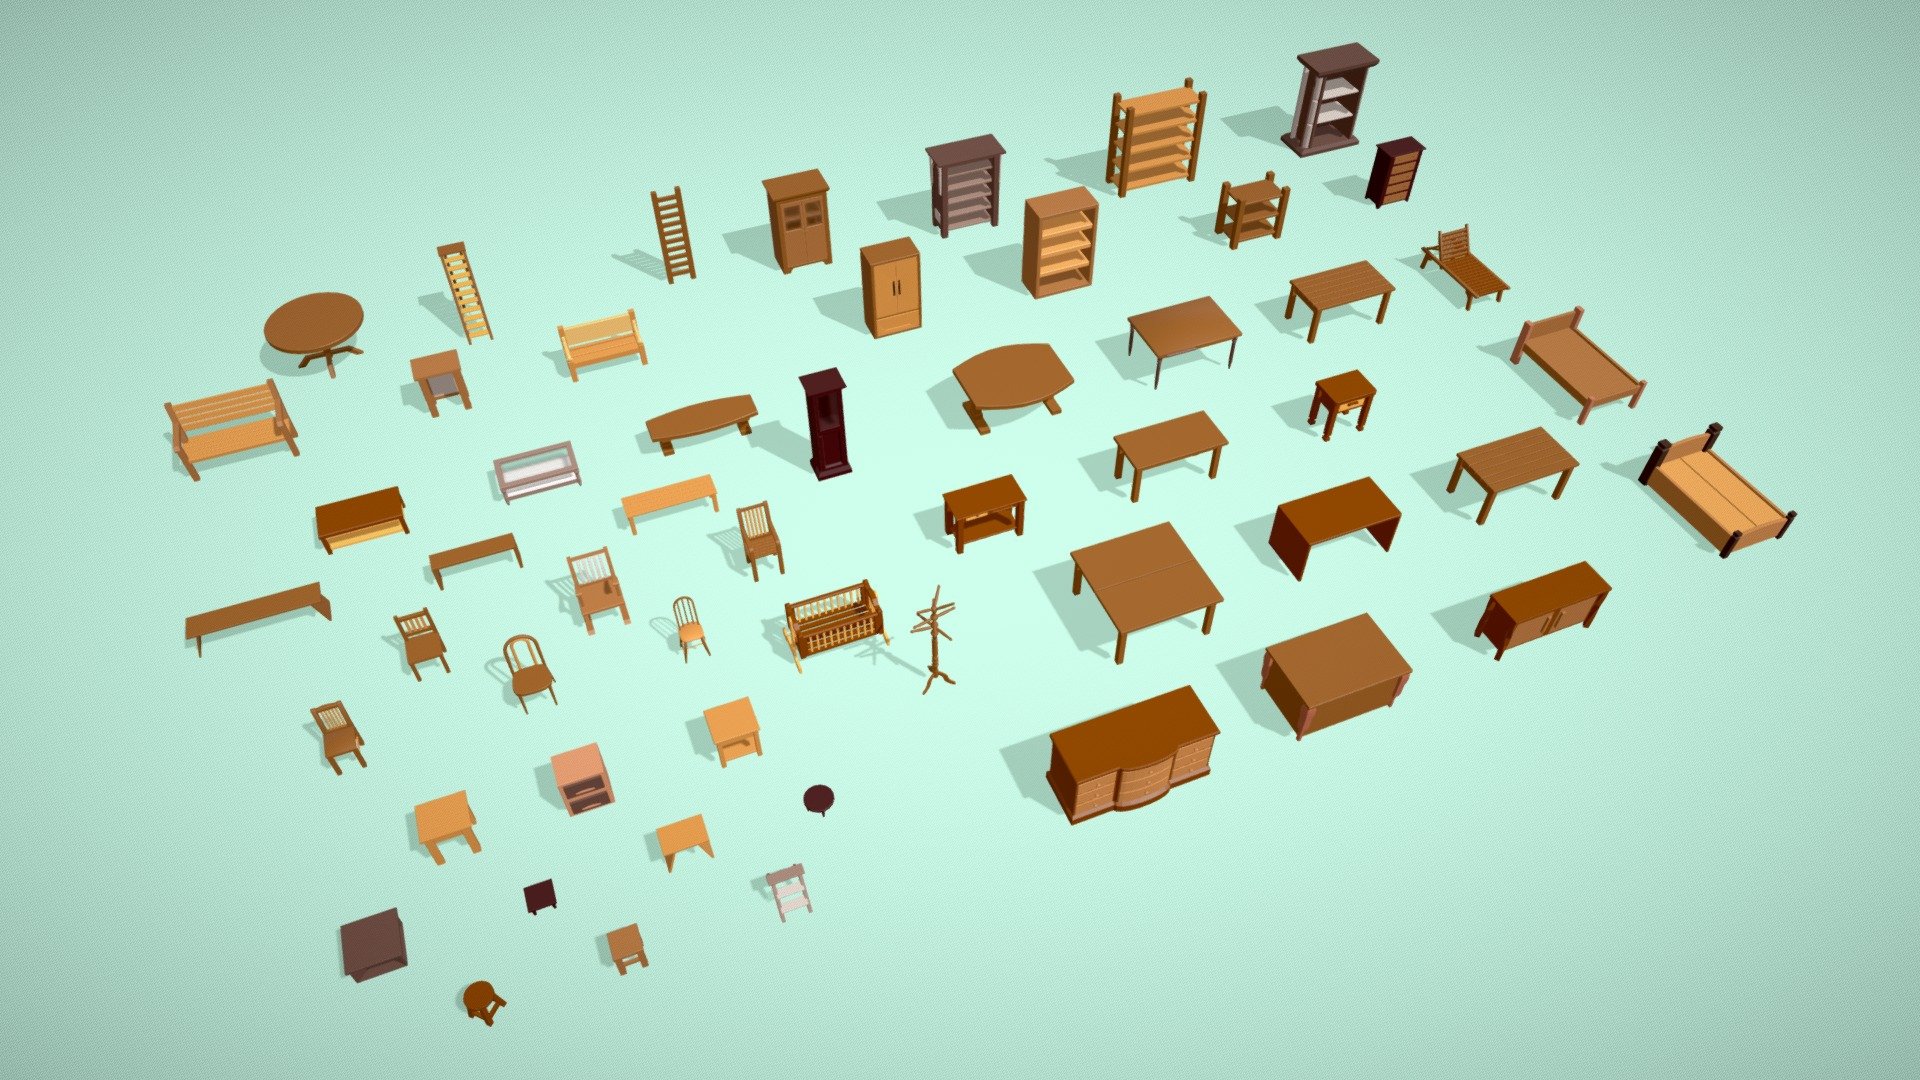 Created the wooden theme furniture pack with various wood colors &amp; cartoon style.
All the objects were originally made with a blender.

The pack included the following objects:
- Chairs
- Tables
- Cupboards
- Tripods
- Beds

Follow us to get updates about more models. If you like our models then please like and comment 3d model